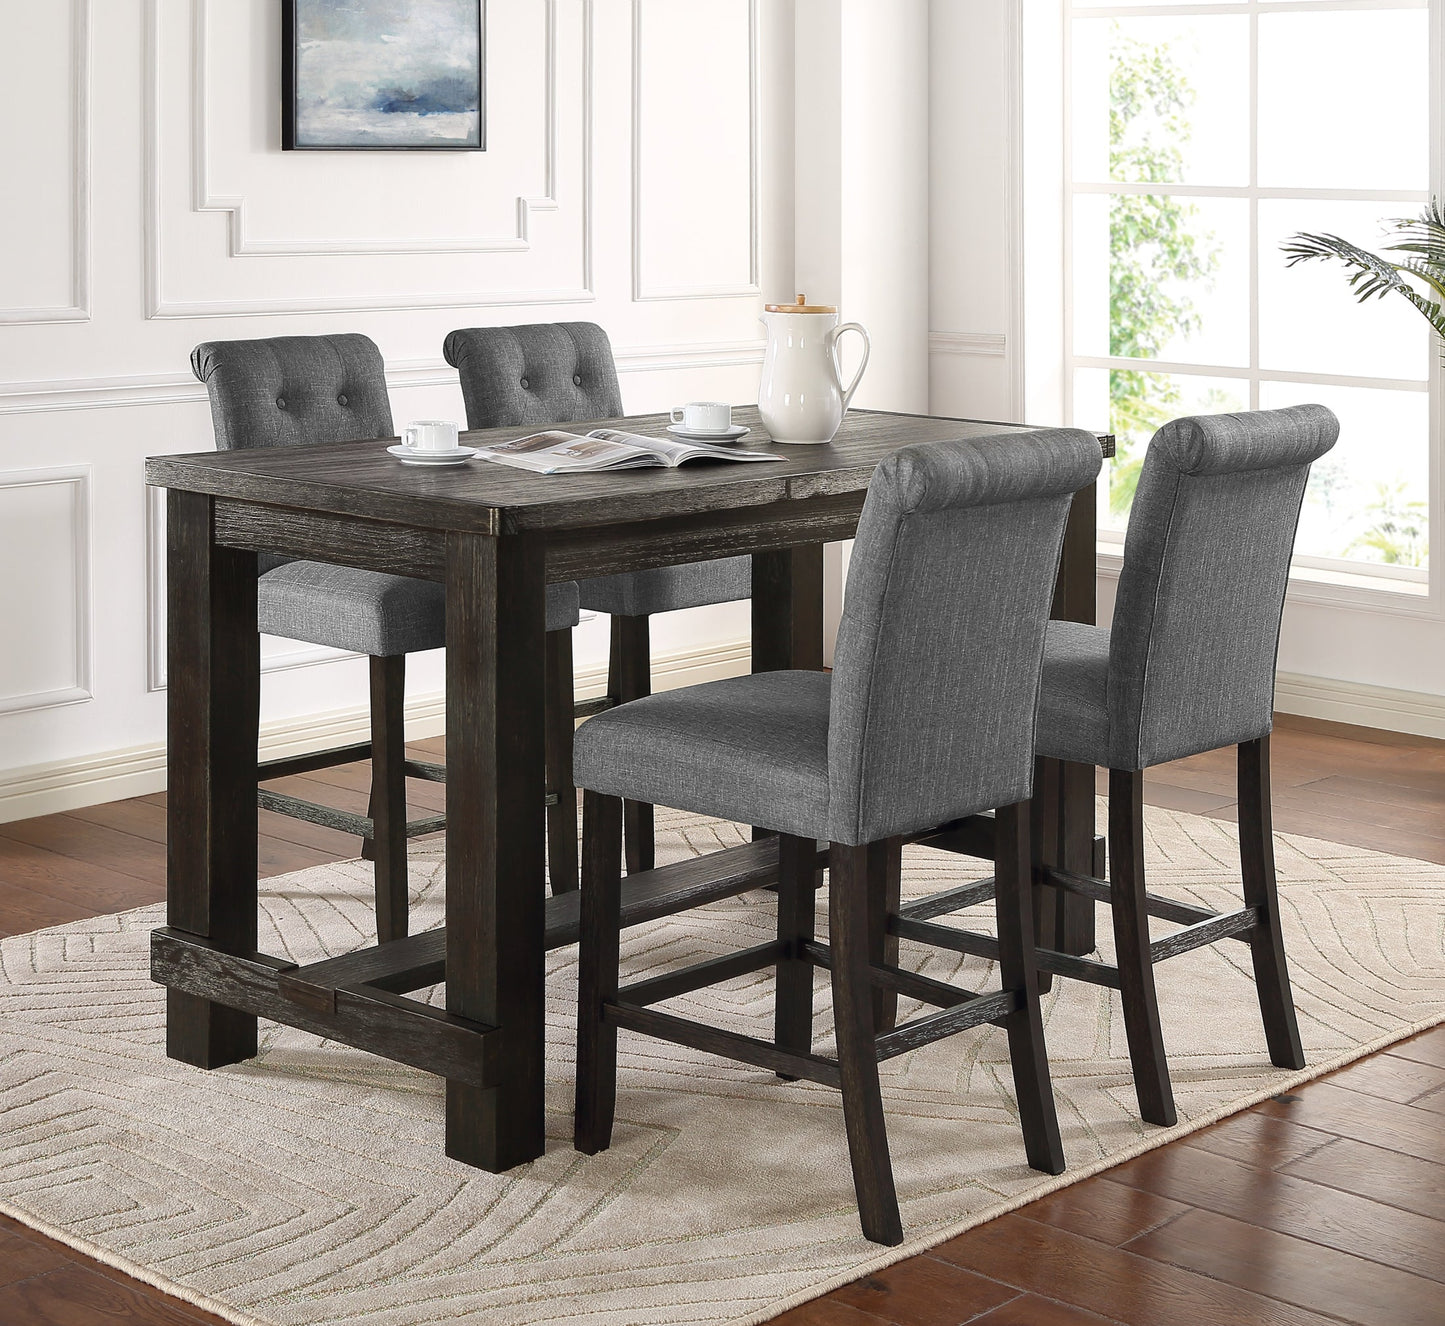 Leviton Antique Black Finished Wood 5-Piece Counter Height Dining Set, Gray